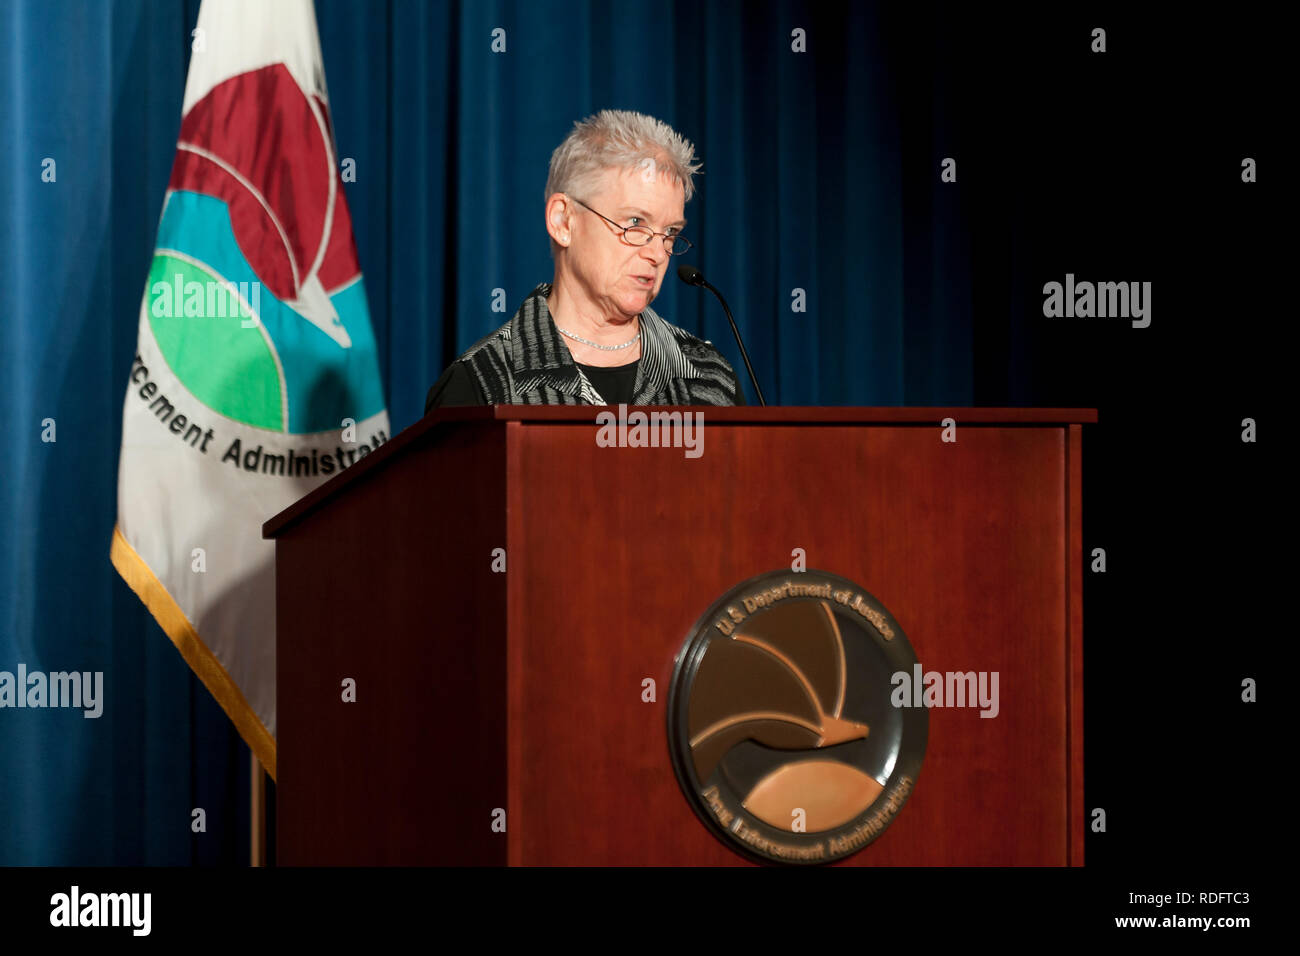 Elizabeth L. Maurer, Curator of Education for the DEA Museum, speaking at lectern - USA Stock Photo